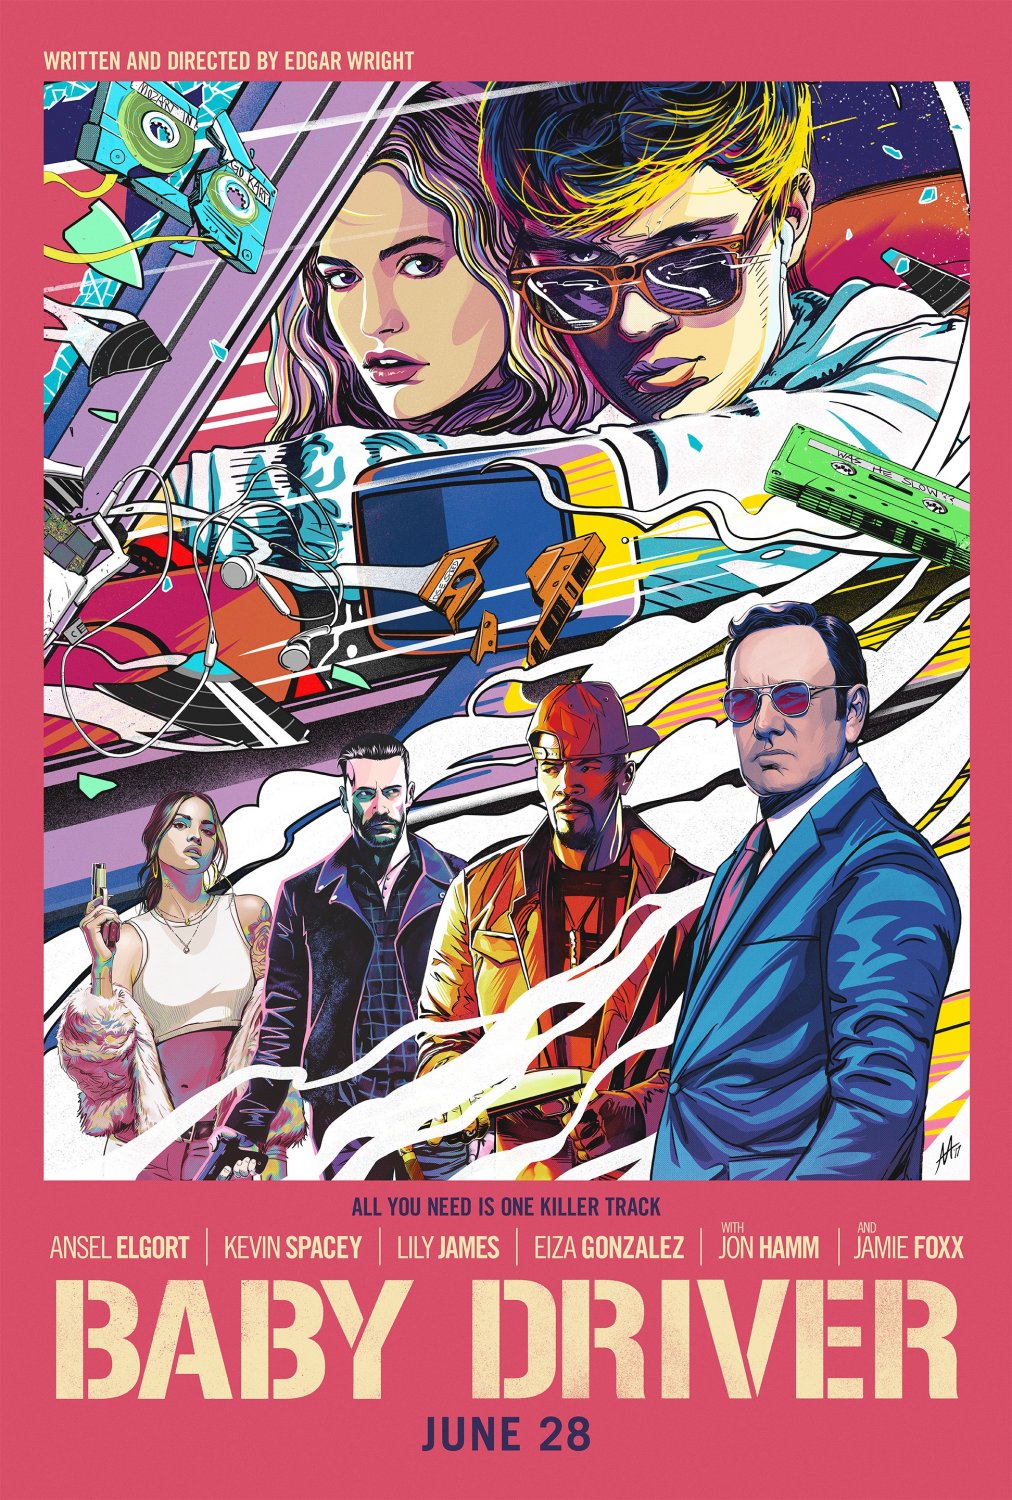 Baby Driver Movie Poster 13x19 inches